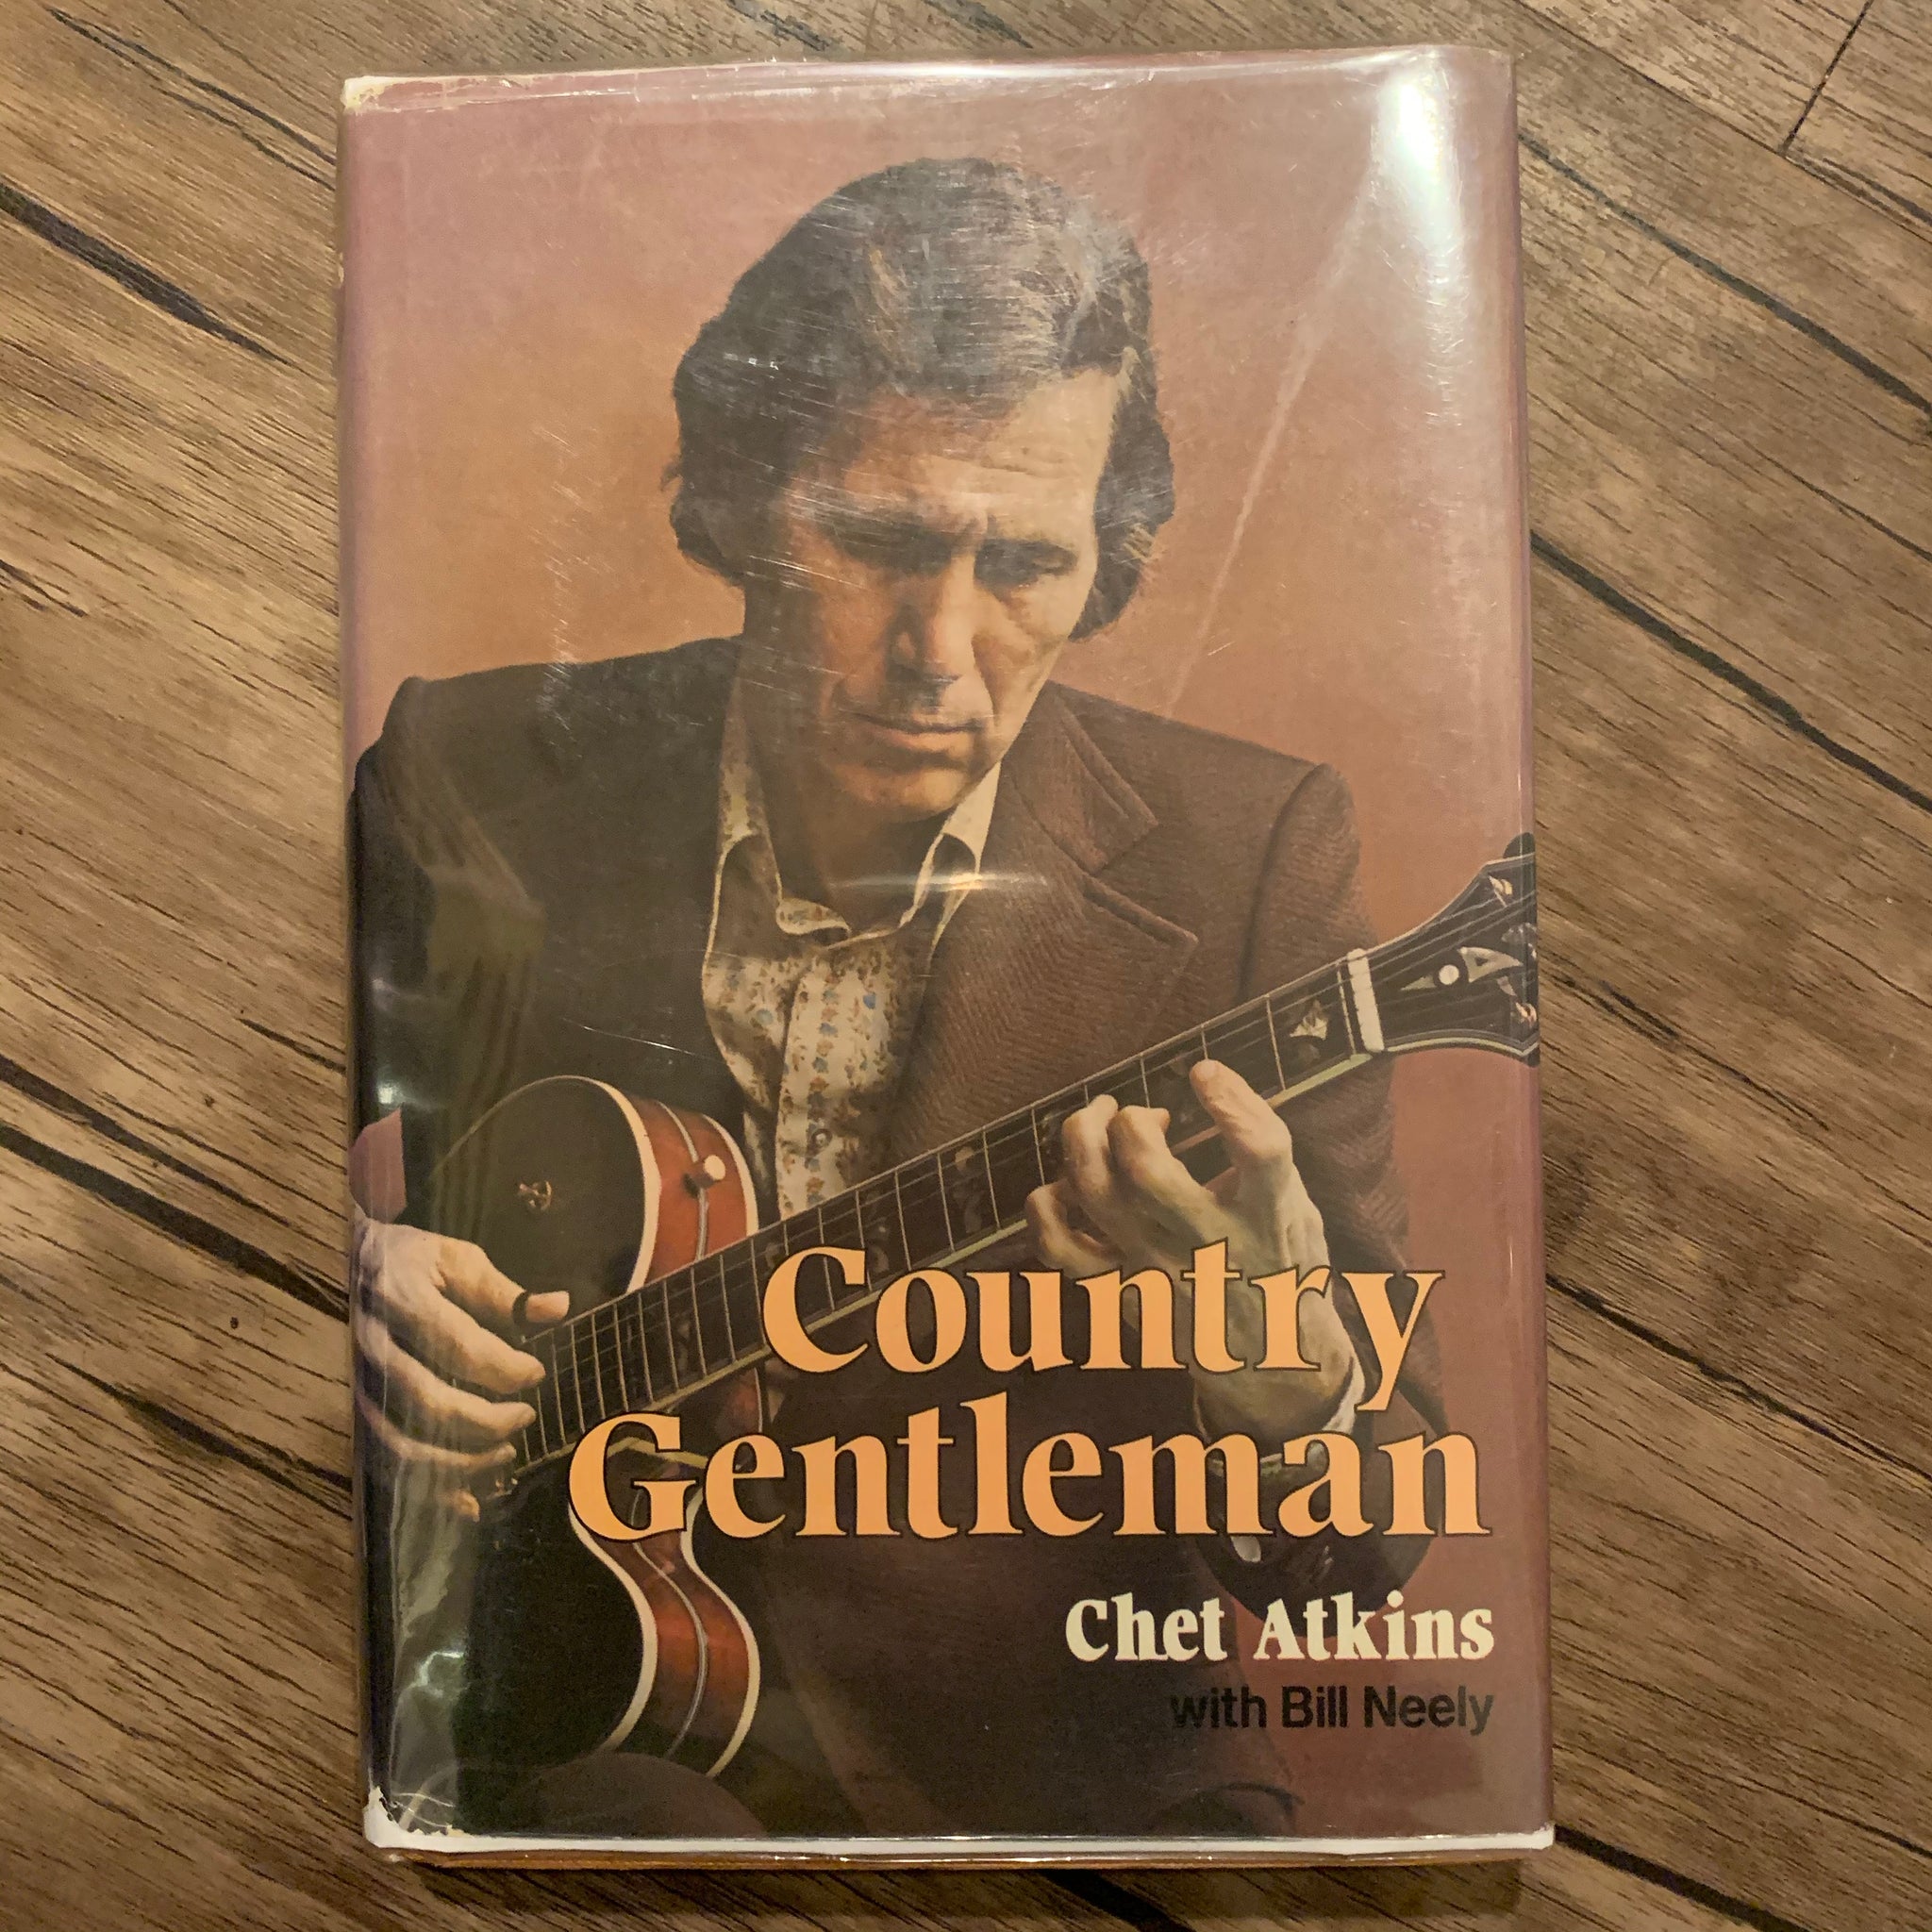 Country Gentleman by Chet Atkins inscribed/signed